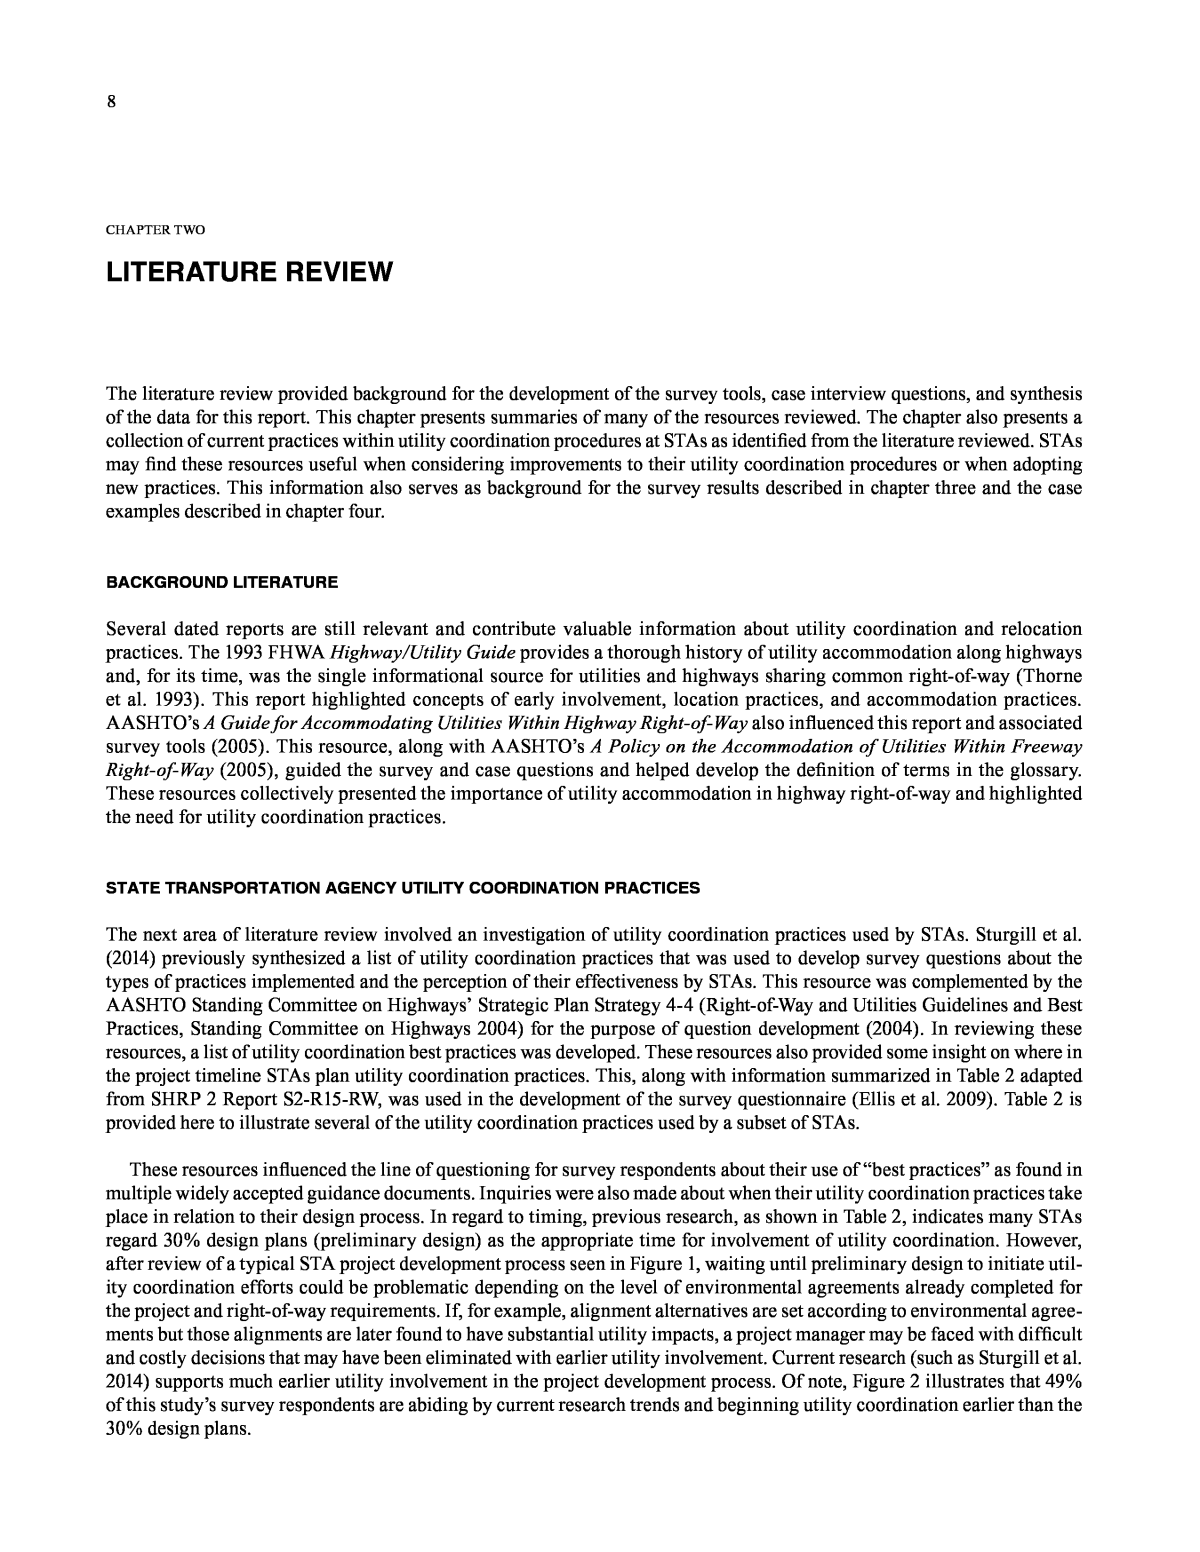 example of literature review for project report